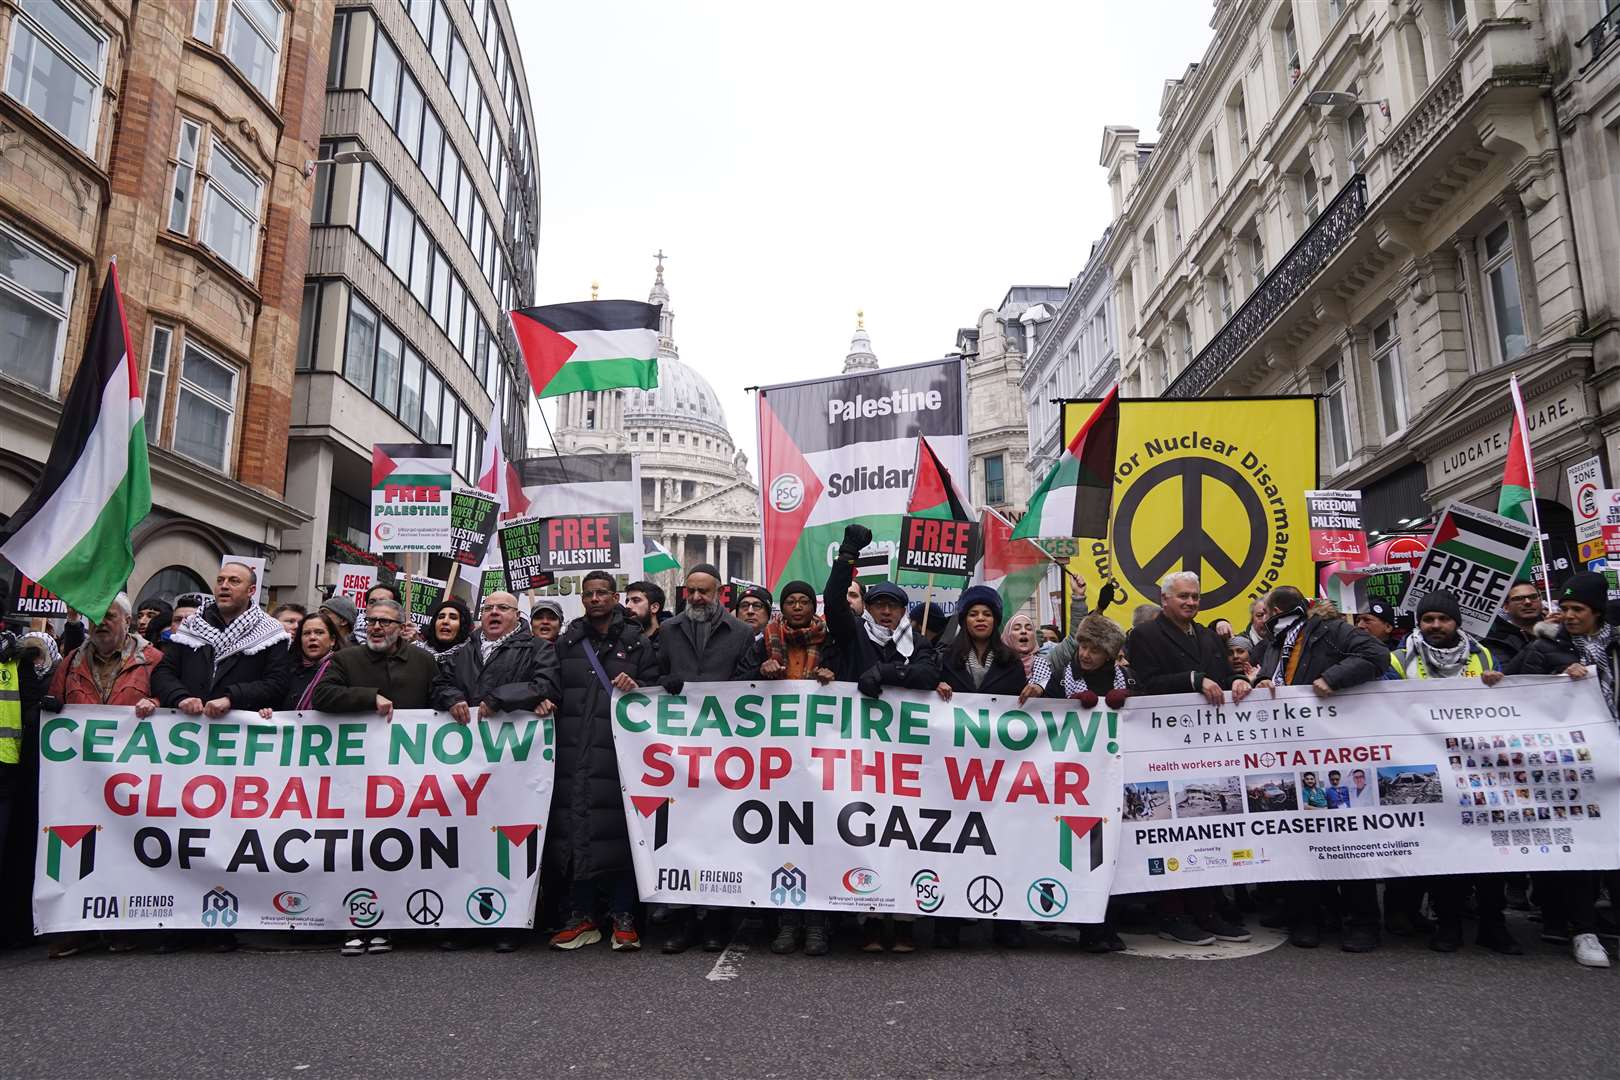 The protesters called for an immediate ceasefire (Lucy North/PA)